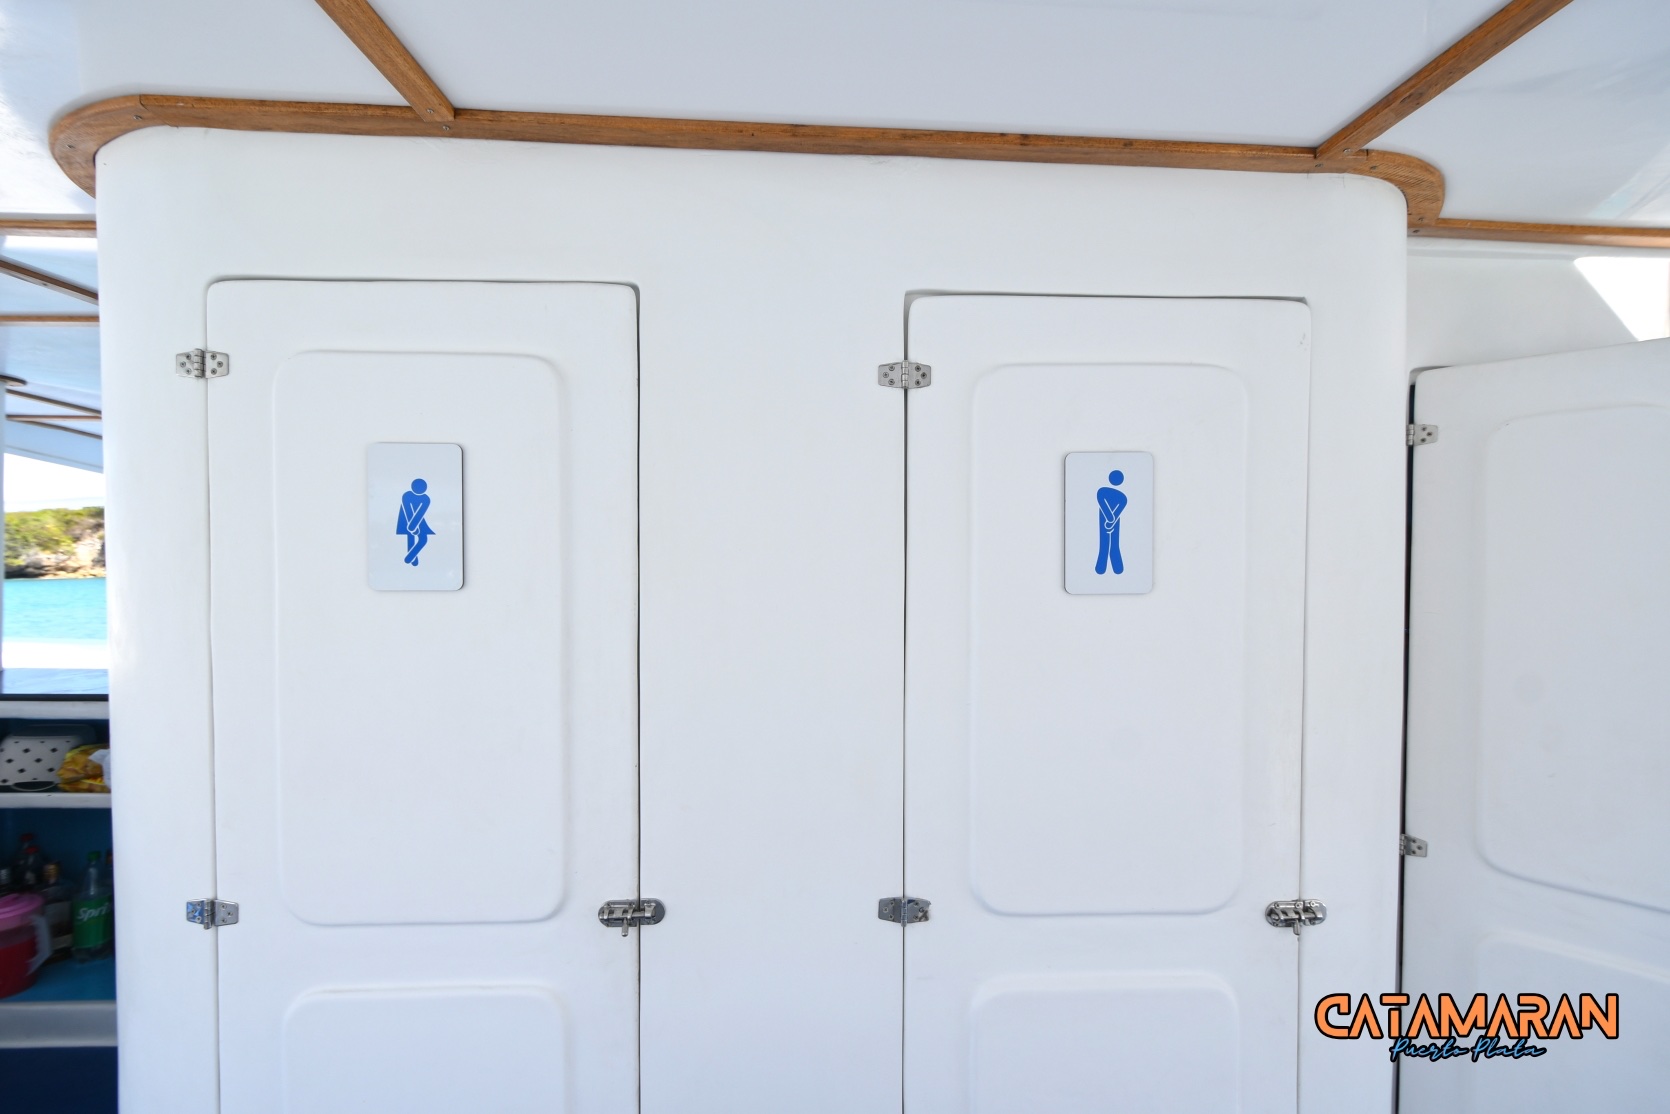 His and hers bathrooms